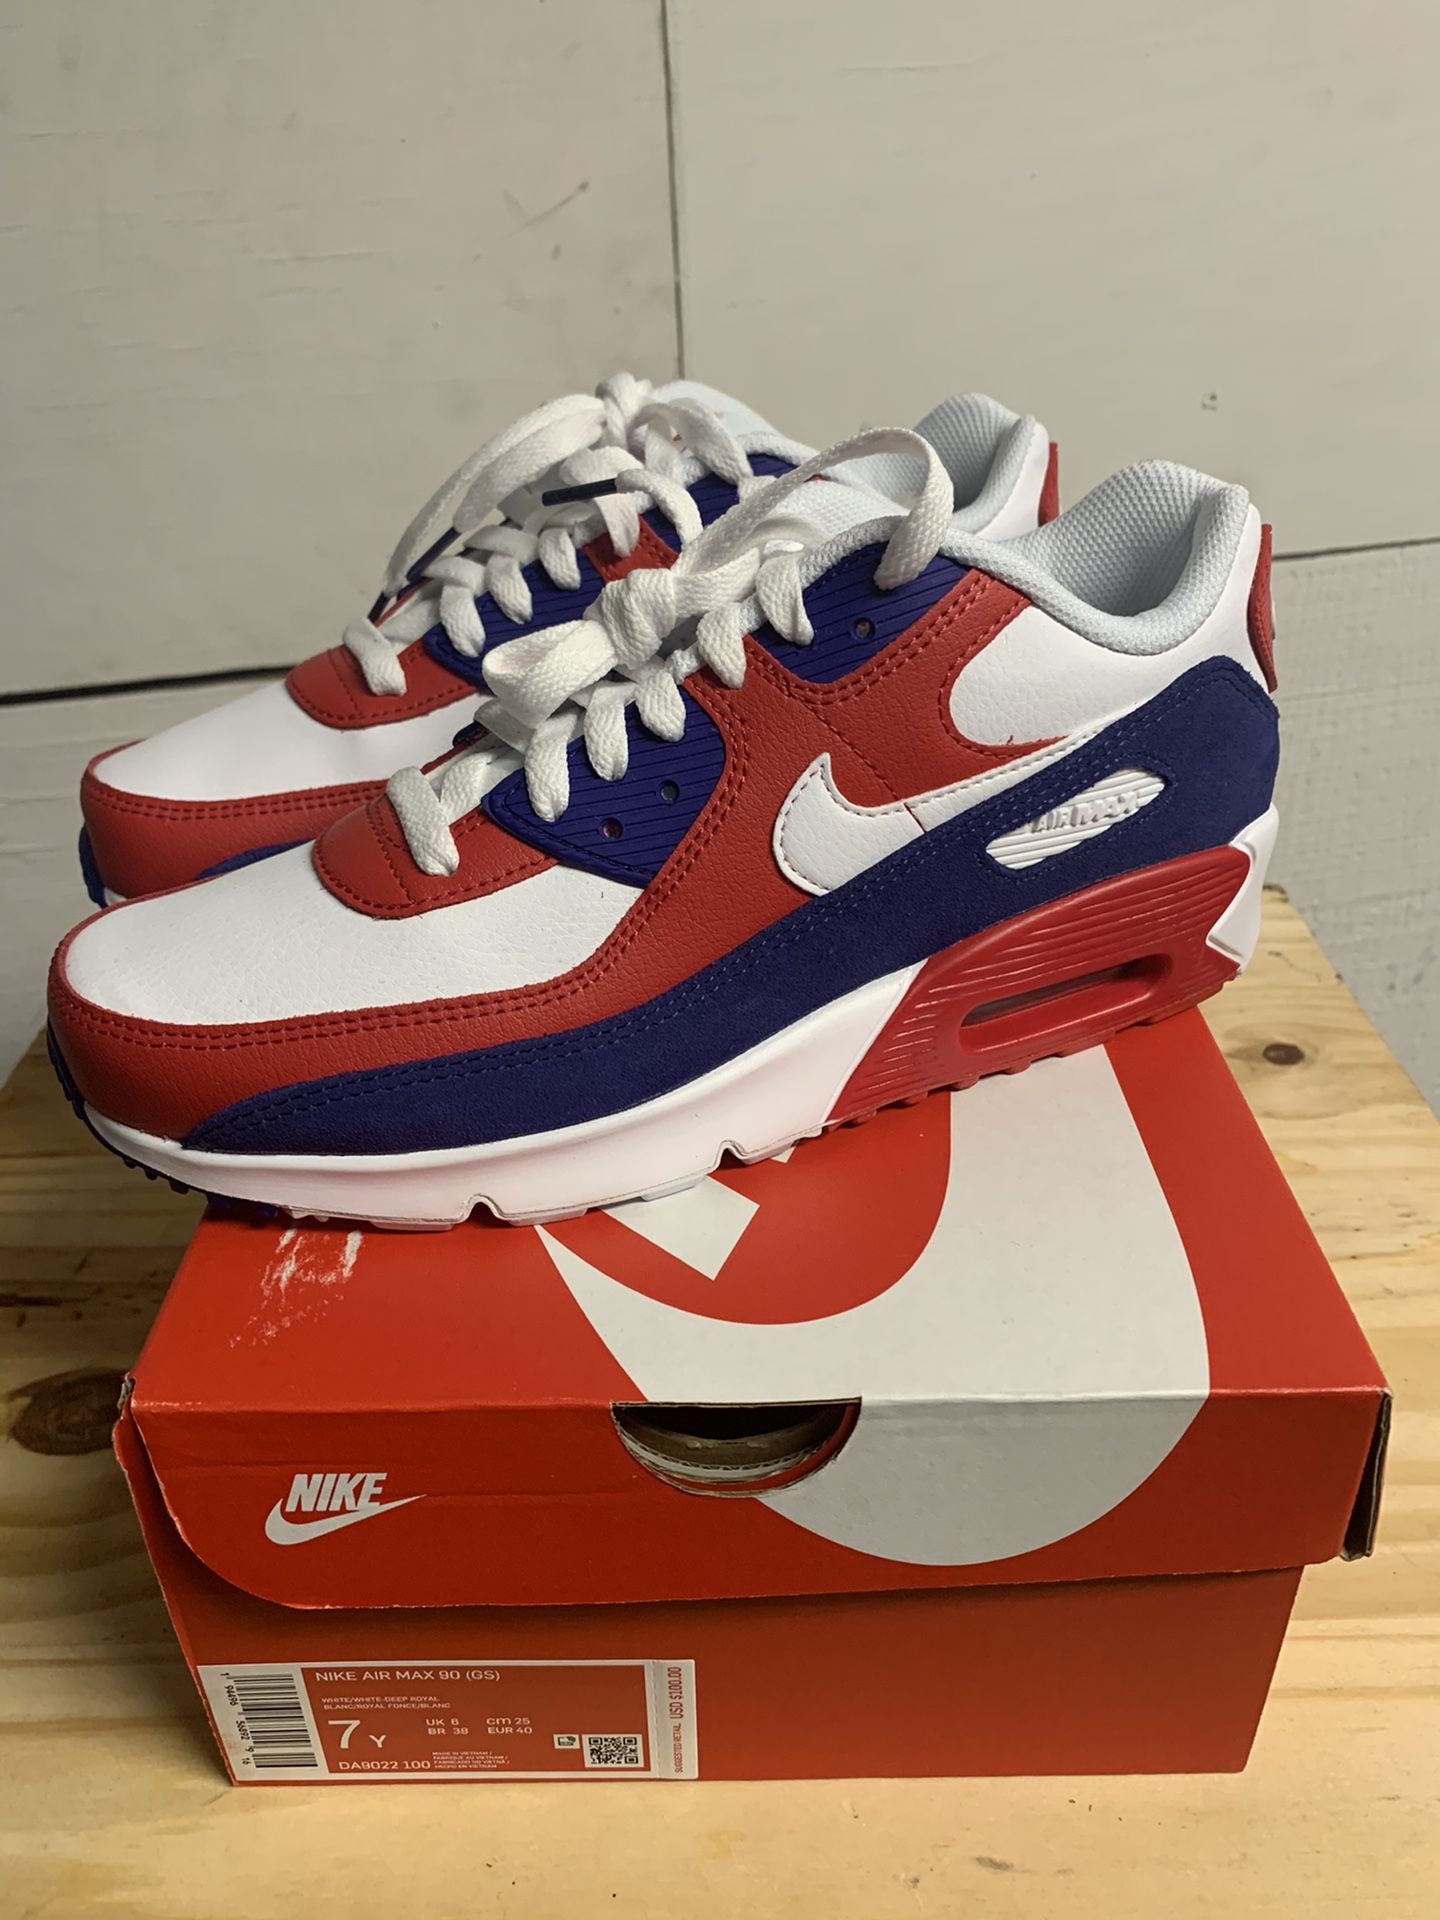 nedenunder Partina City Hæderlig Nike Air Max 90 White Deep Royal University Red GS 7Y/ 8.5Womens for Sale  in San Jose, CA - OfferUp